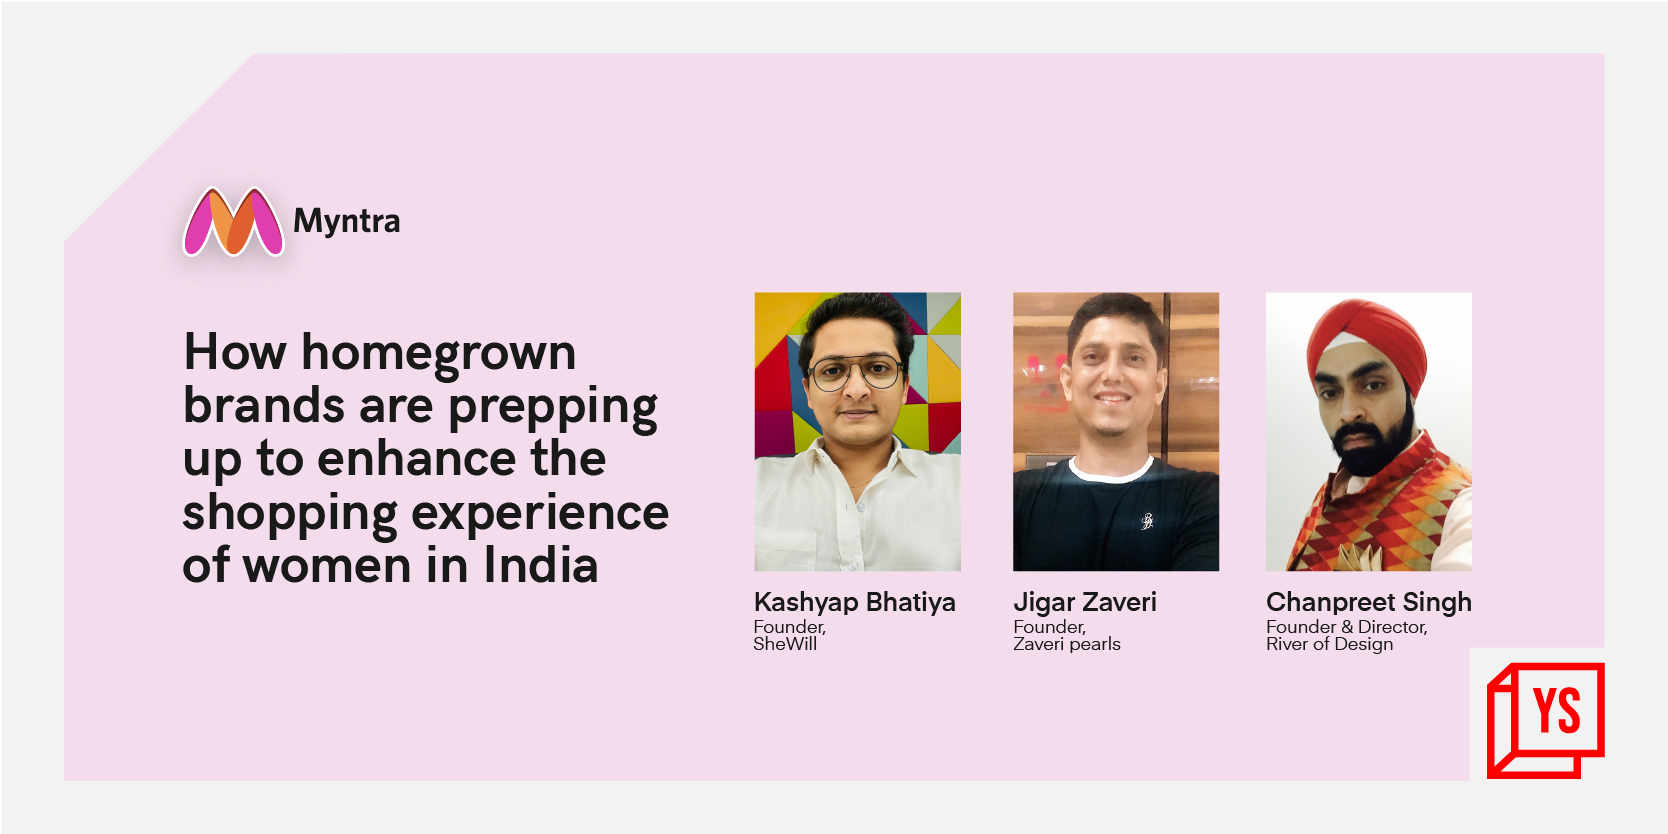 Myntra End of Reason Sale: How homegrown brands are prepping up to enhance the shopping experience of women in India 